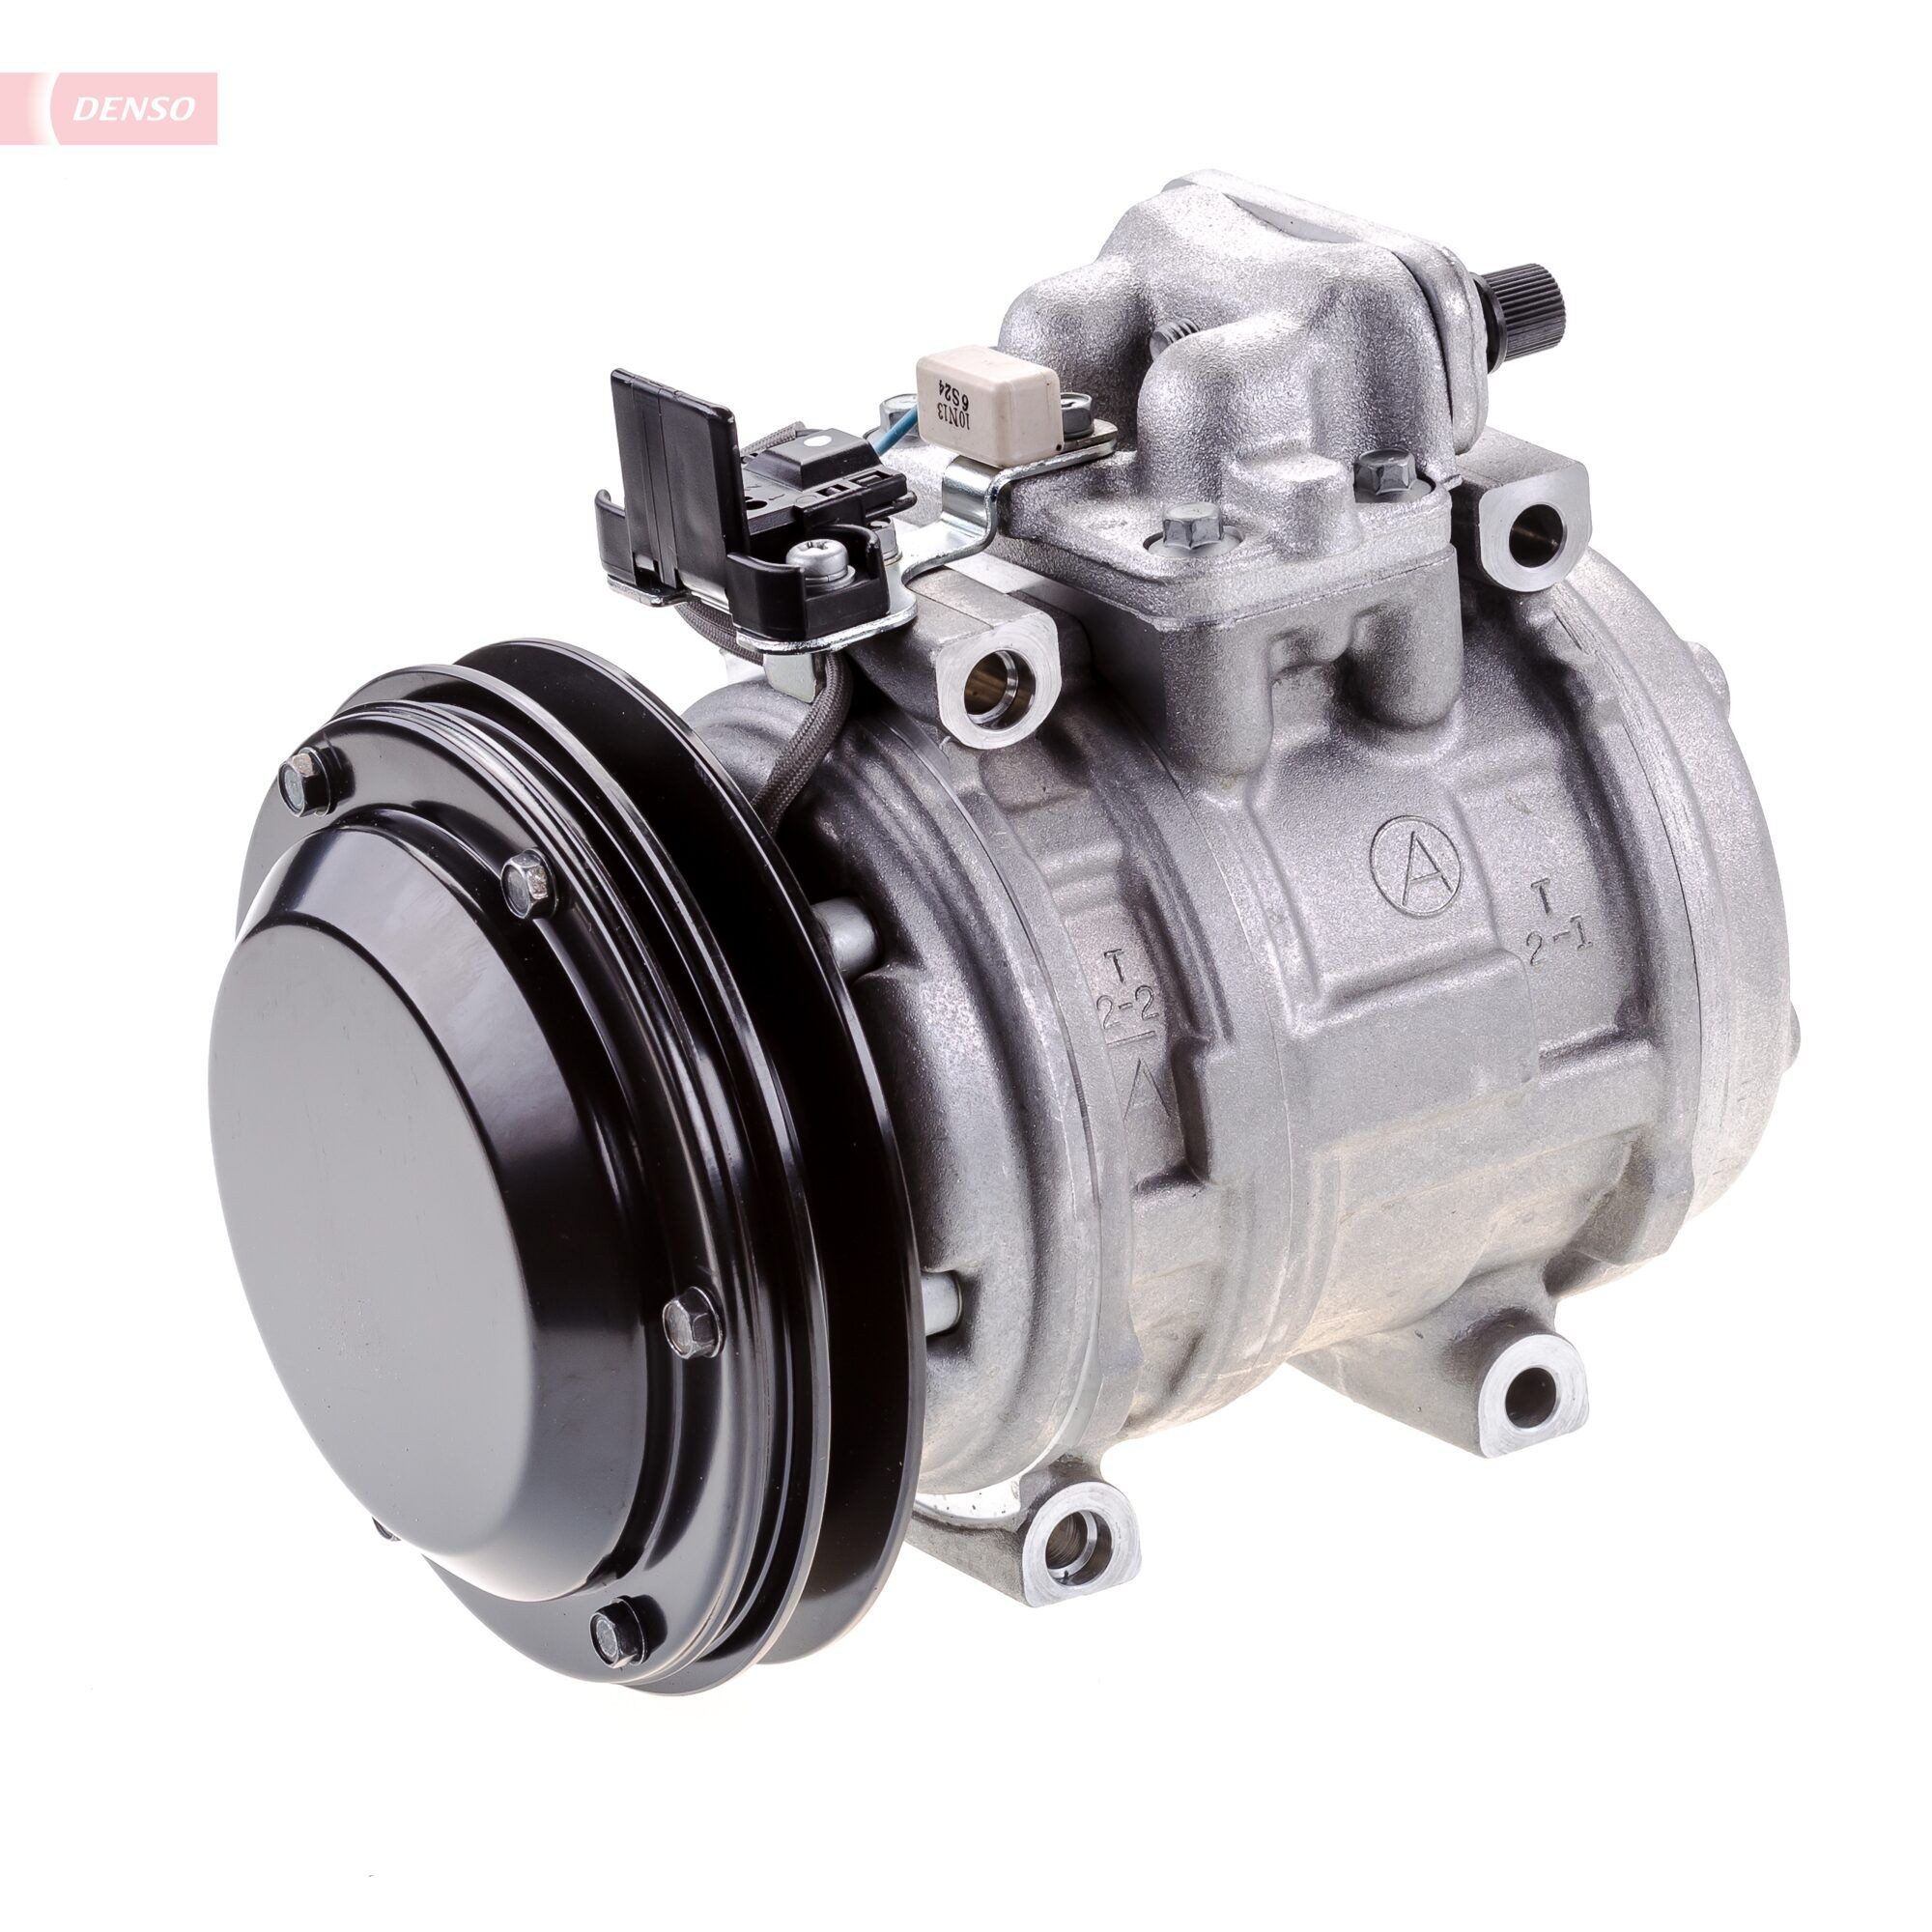 DENSO DCP17095 Air conditioning compressor 10PA15C, 12V, PAG 46, R 134a, with magnetic clutch